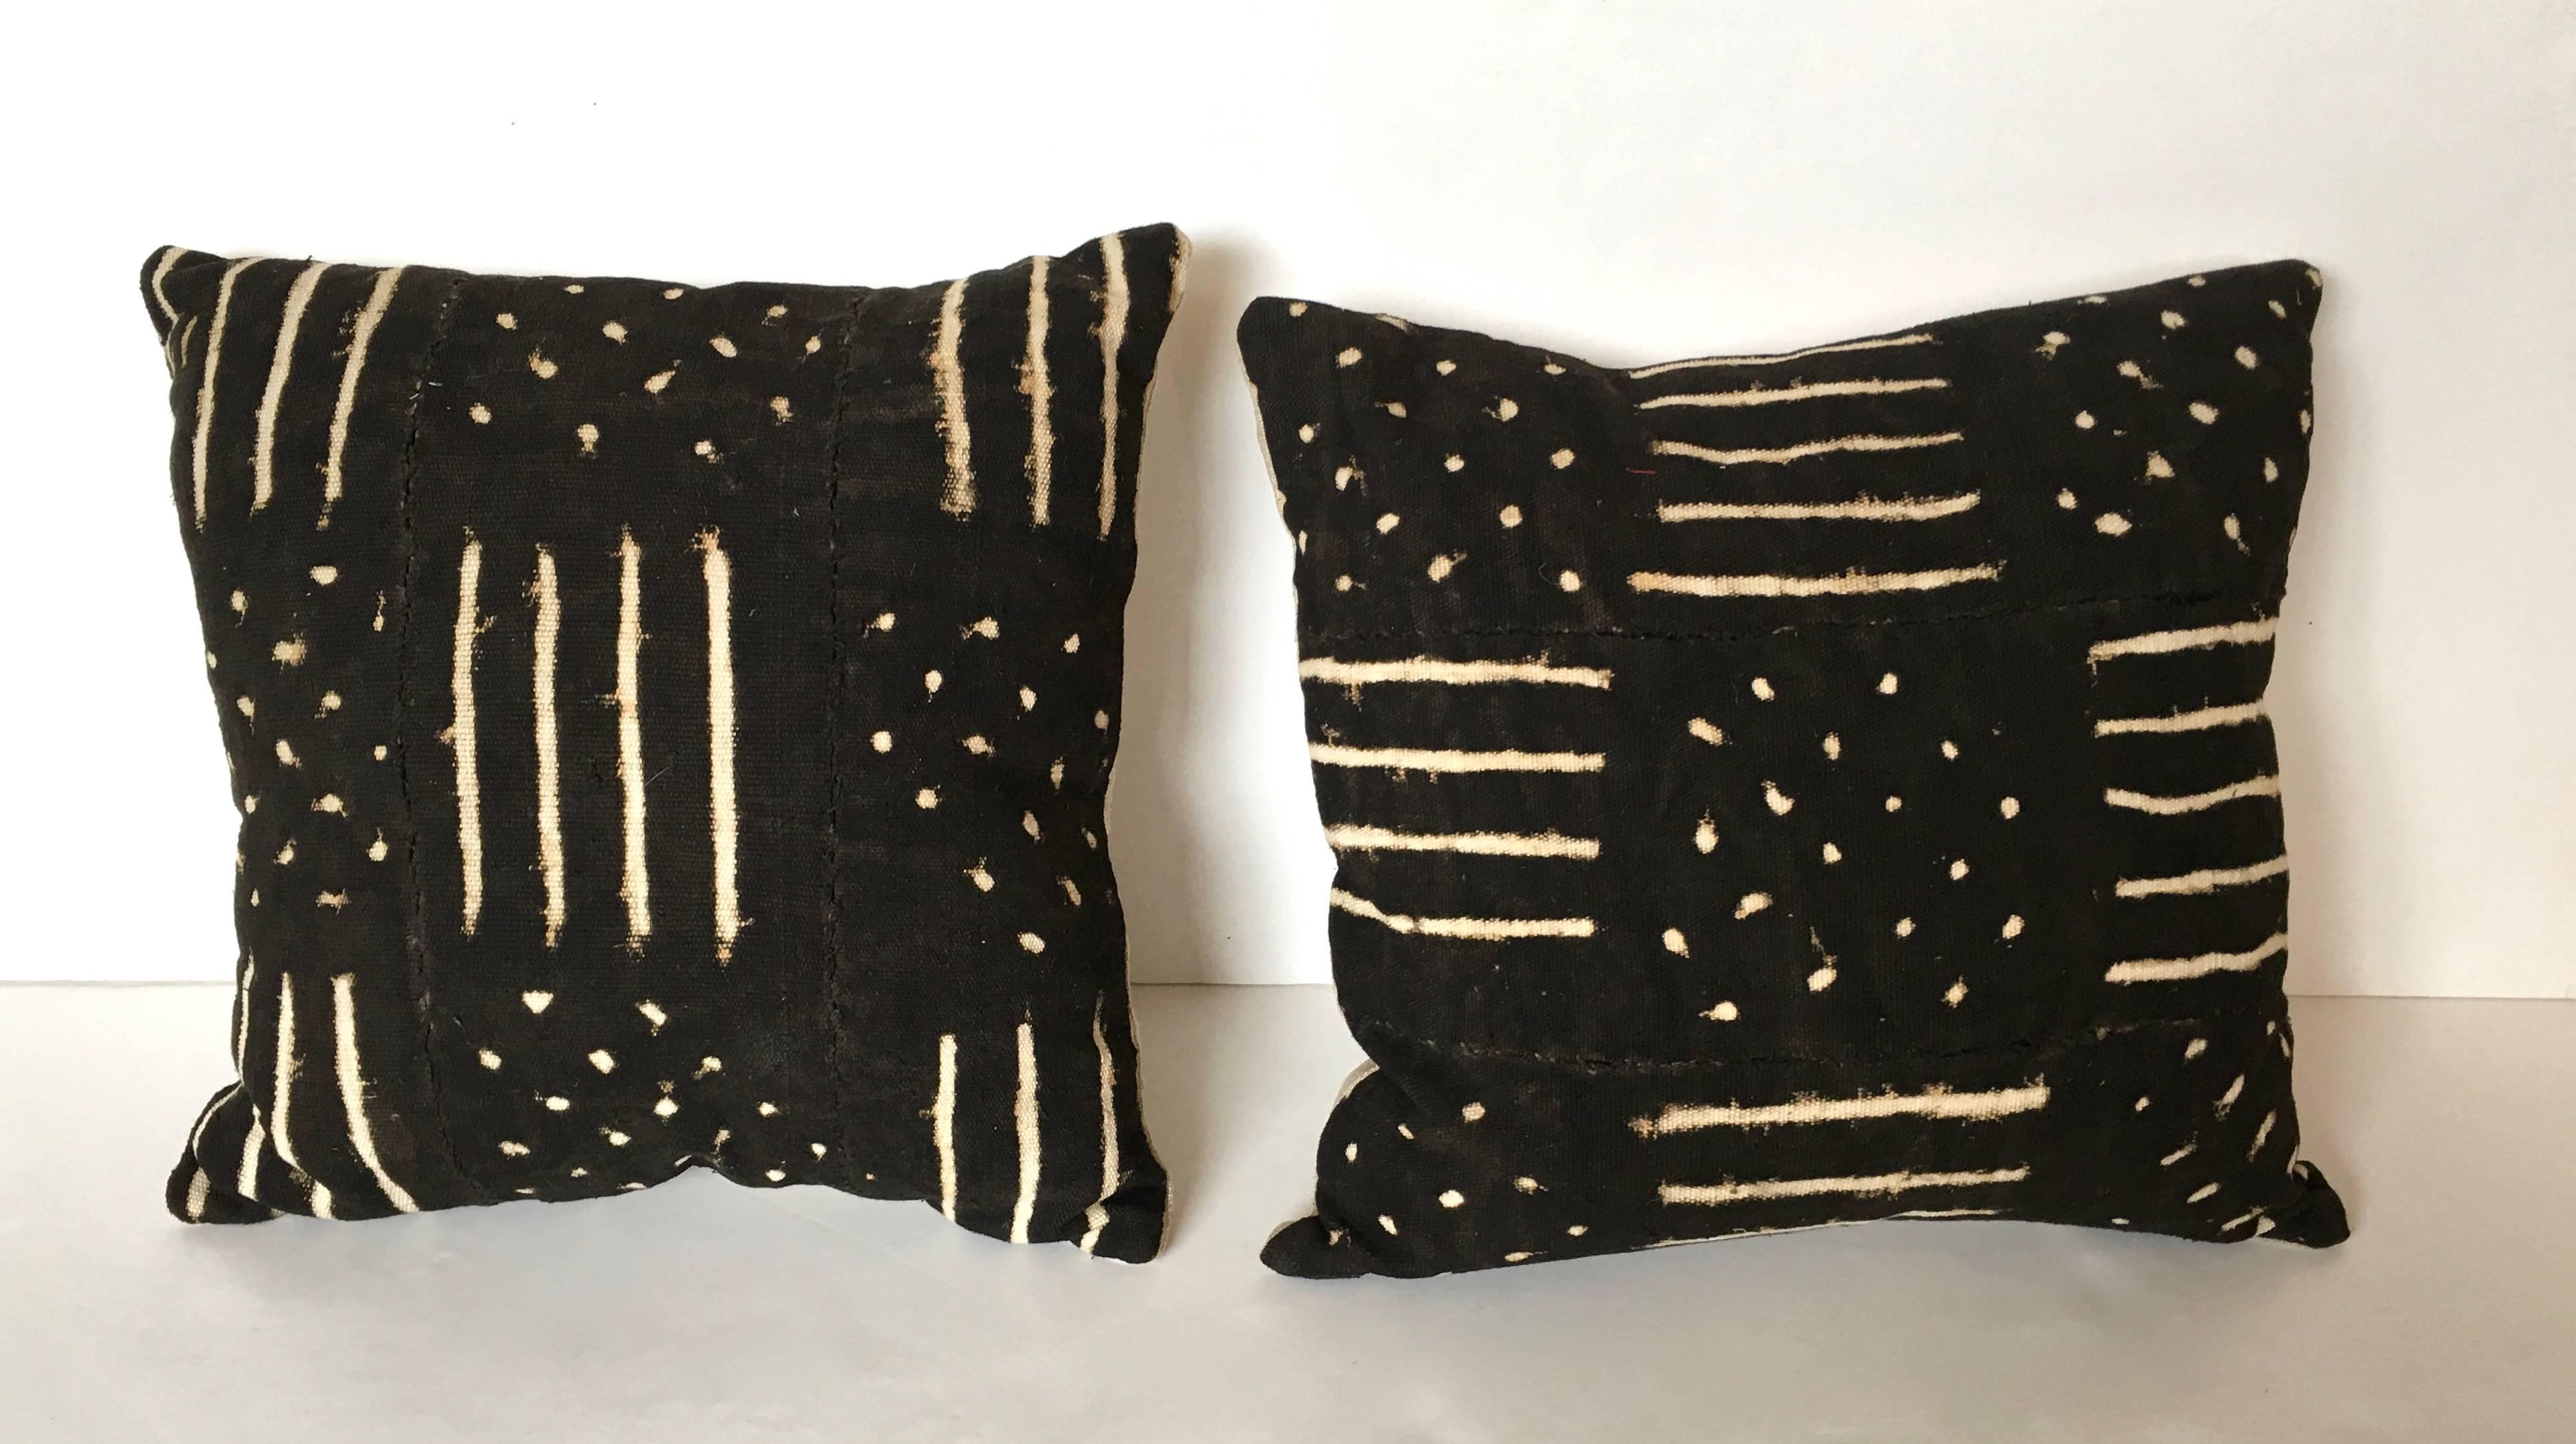 Handmade African mud cloth pillows, in graphic checkerboard pattern consisting of parallel lines and dots, from Mali, made by the Bambara tribe, according to traditional methods, in narrow strips of cloth which are sewn together to make larger